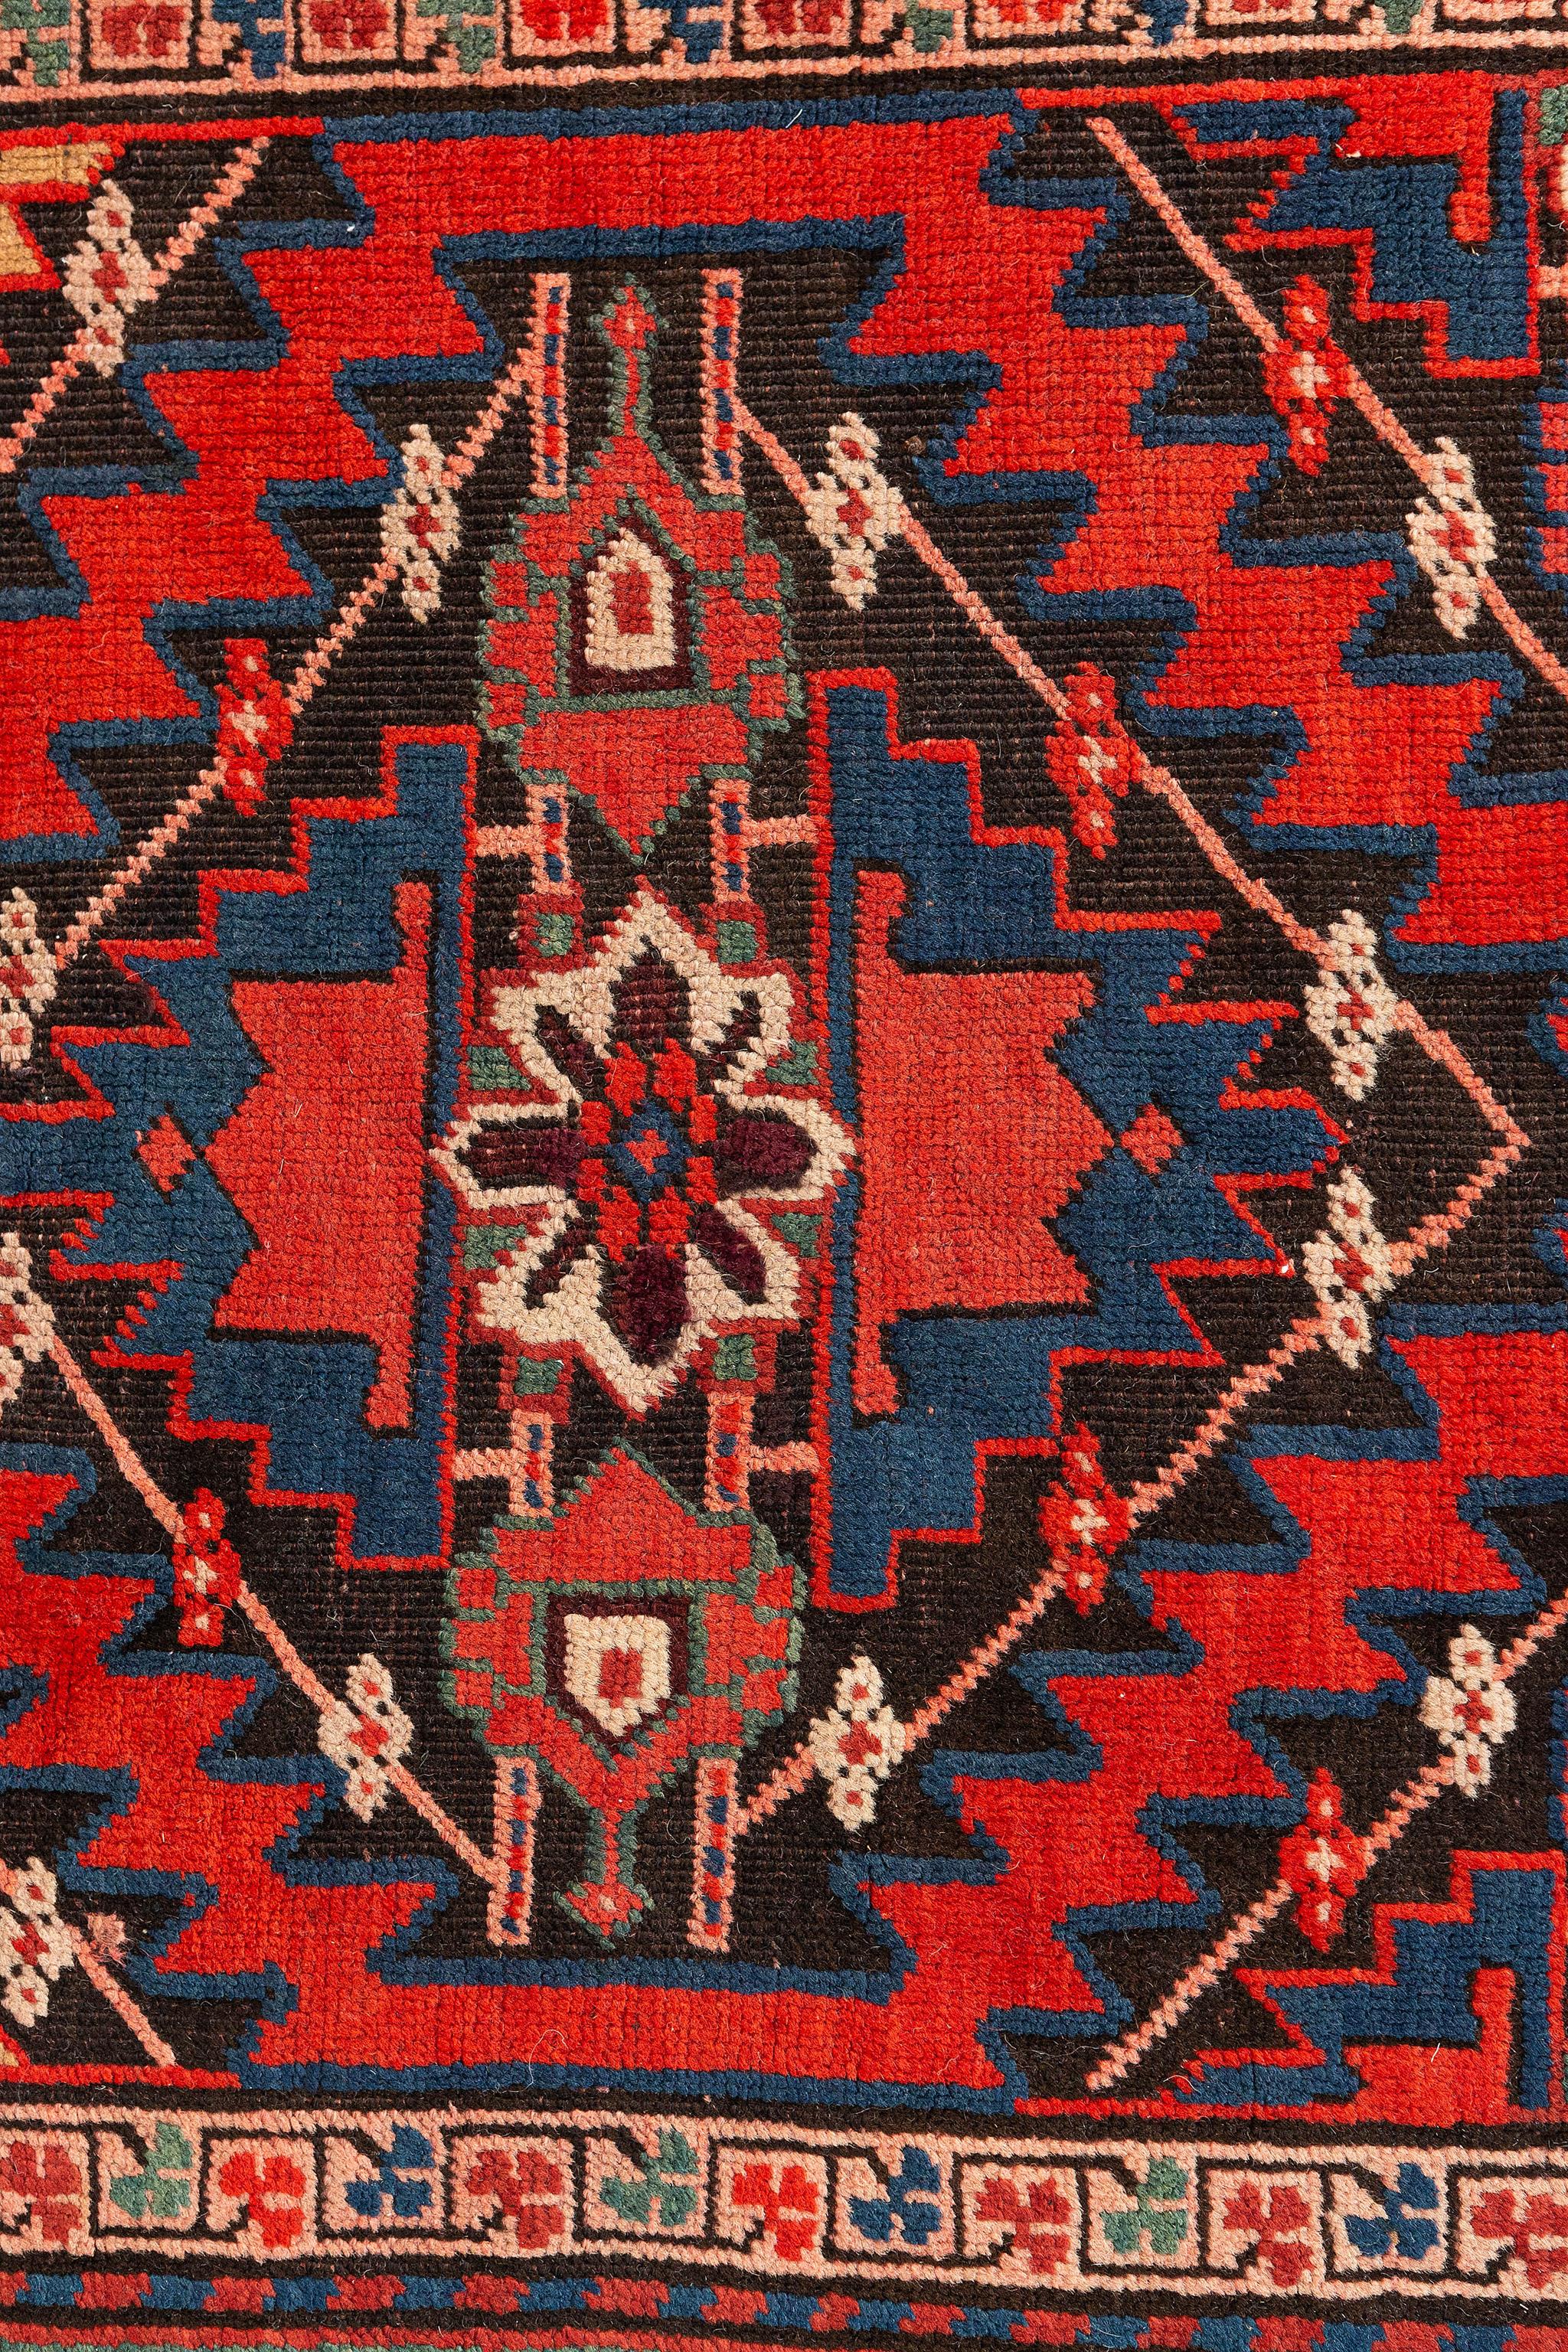 This Vintage Russian Kazak Runenr rug features five red octagonal guls outlined with royal blue latch-hooks edges. Each gul is filled with an eight-point star of wisdom motif on a beige backdrop surrounded by serrated edges and floral vines. From